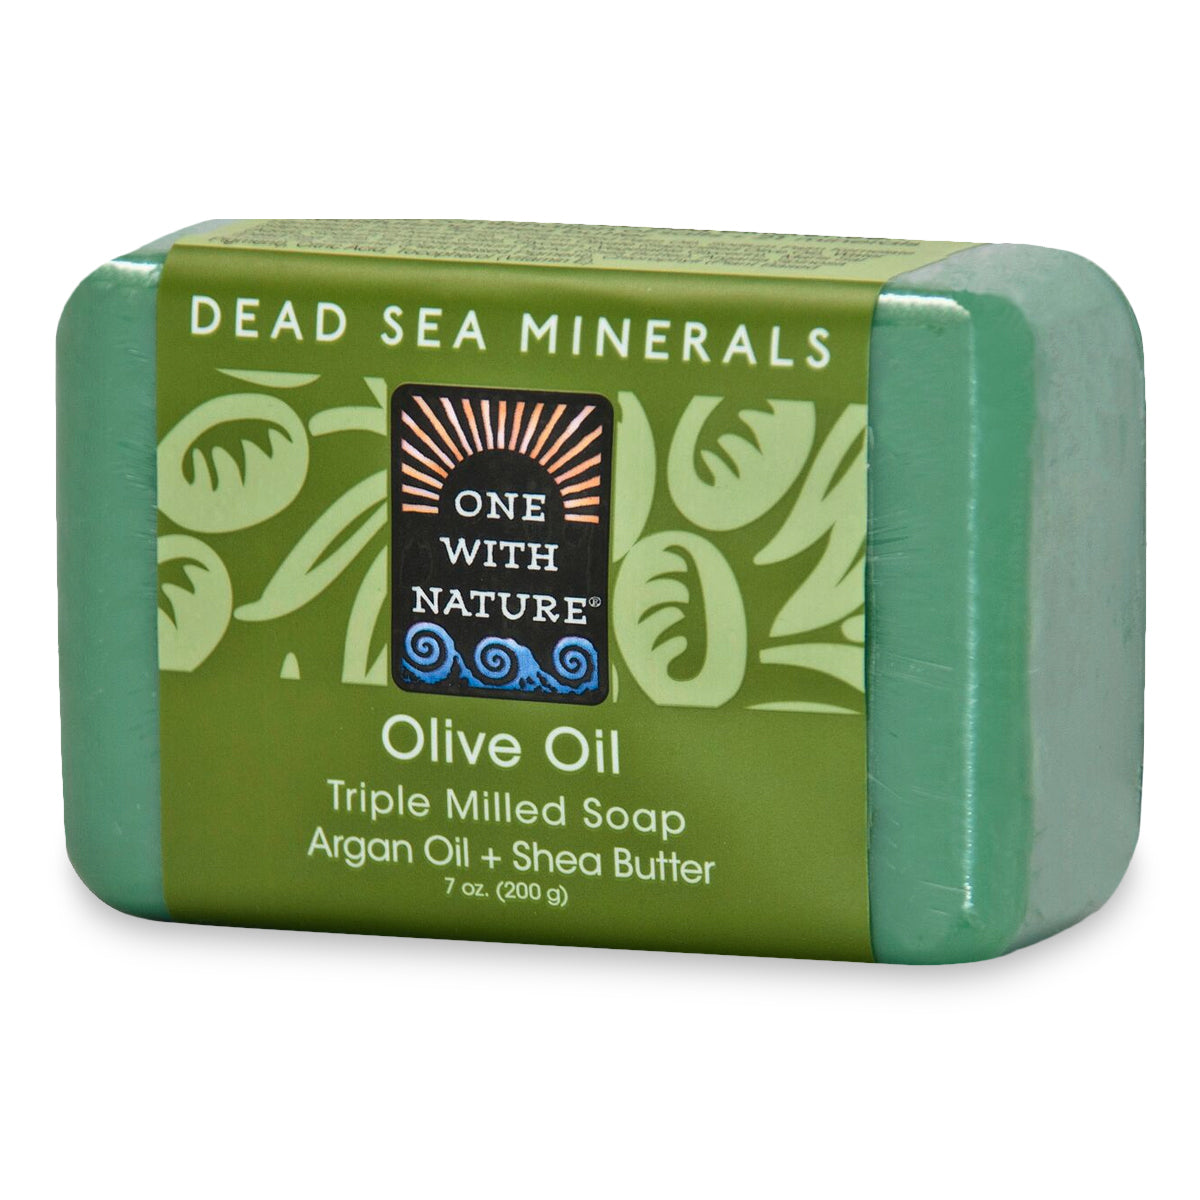 Primary image of Dead Sea Mineral Soap - Olive Oil